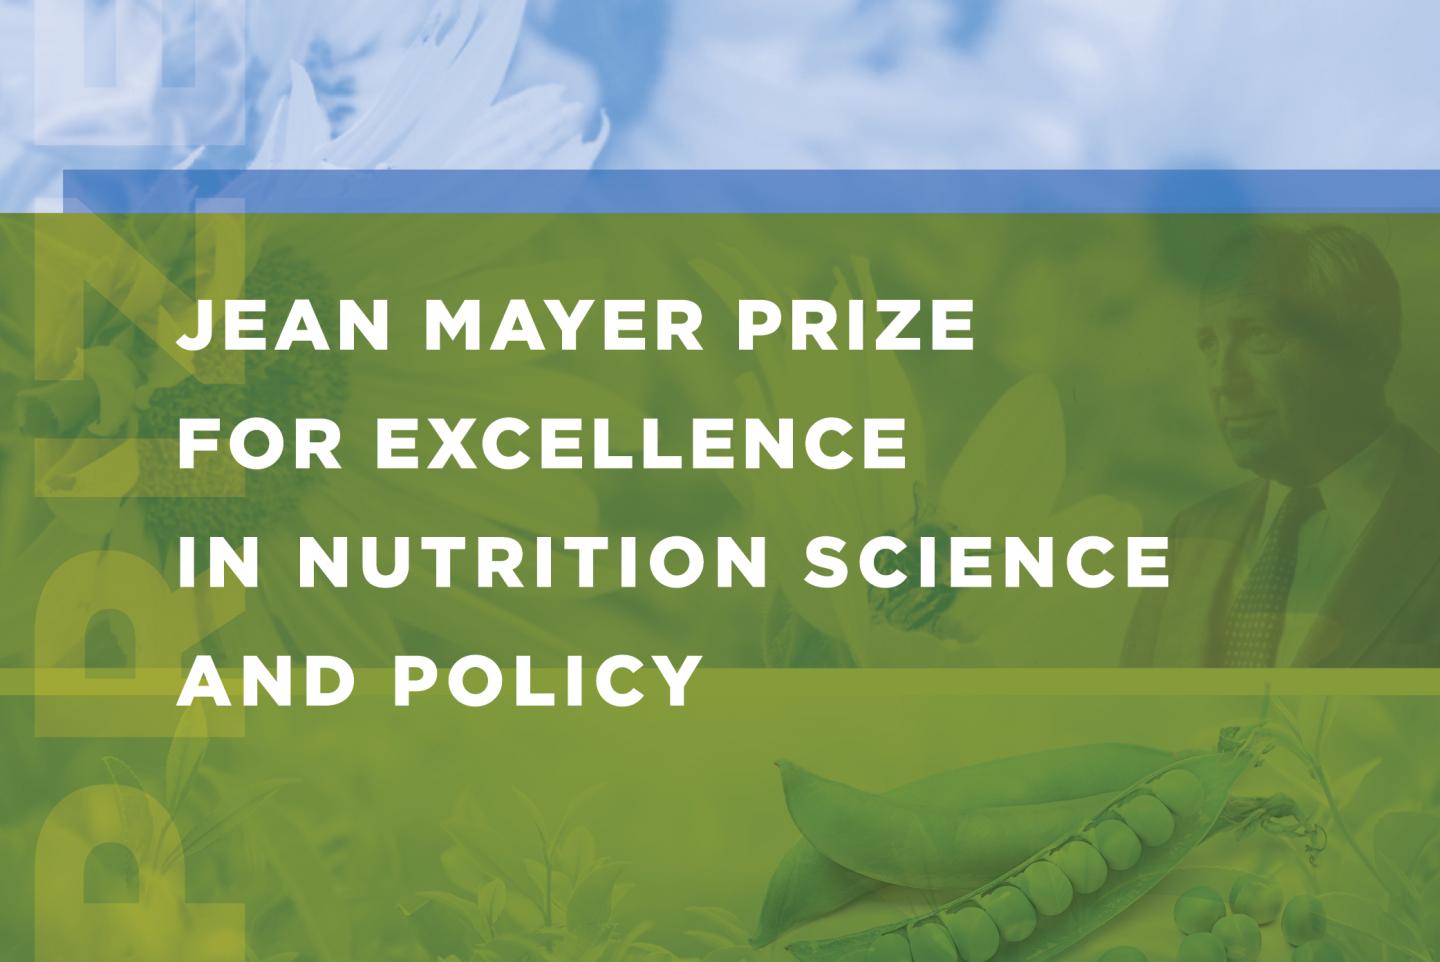 The Jean Mayer Prize for Excellence in Nutrition Science and Policy